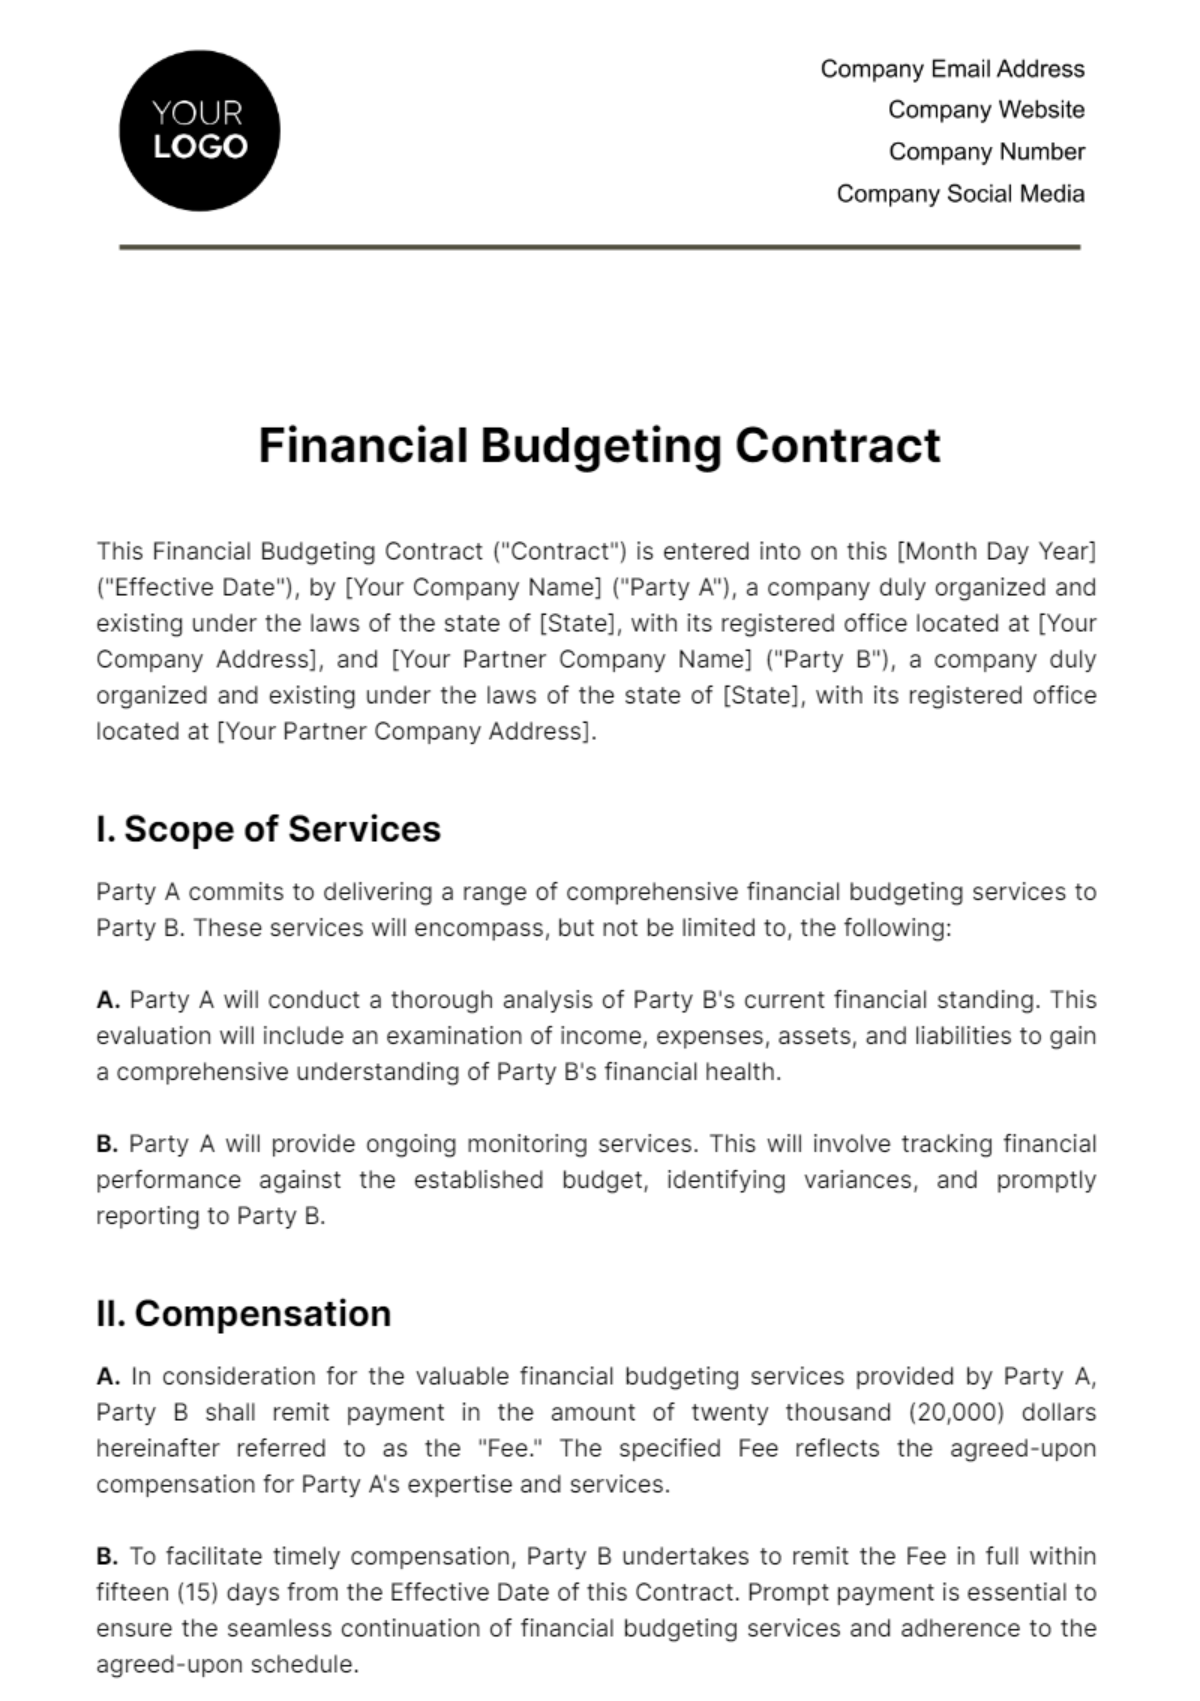 Financial Budgeting Contract Template